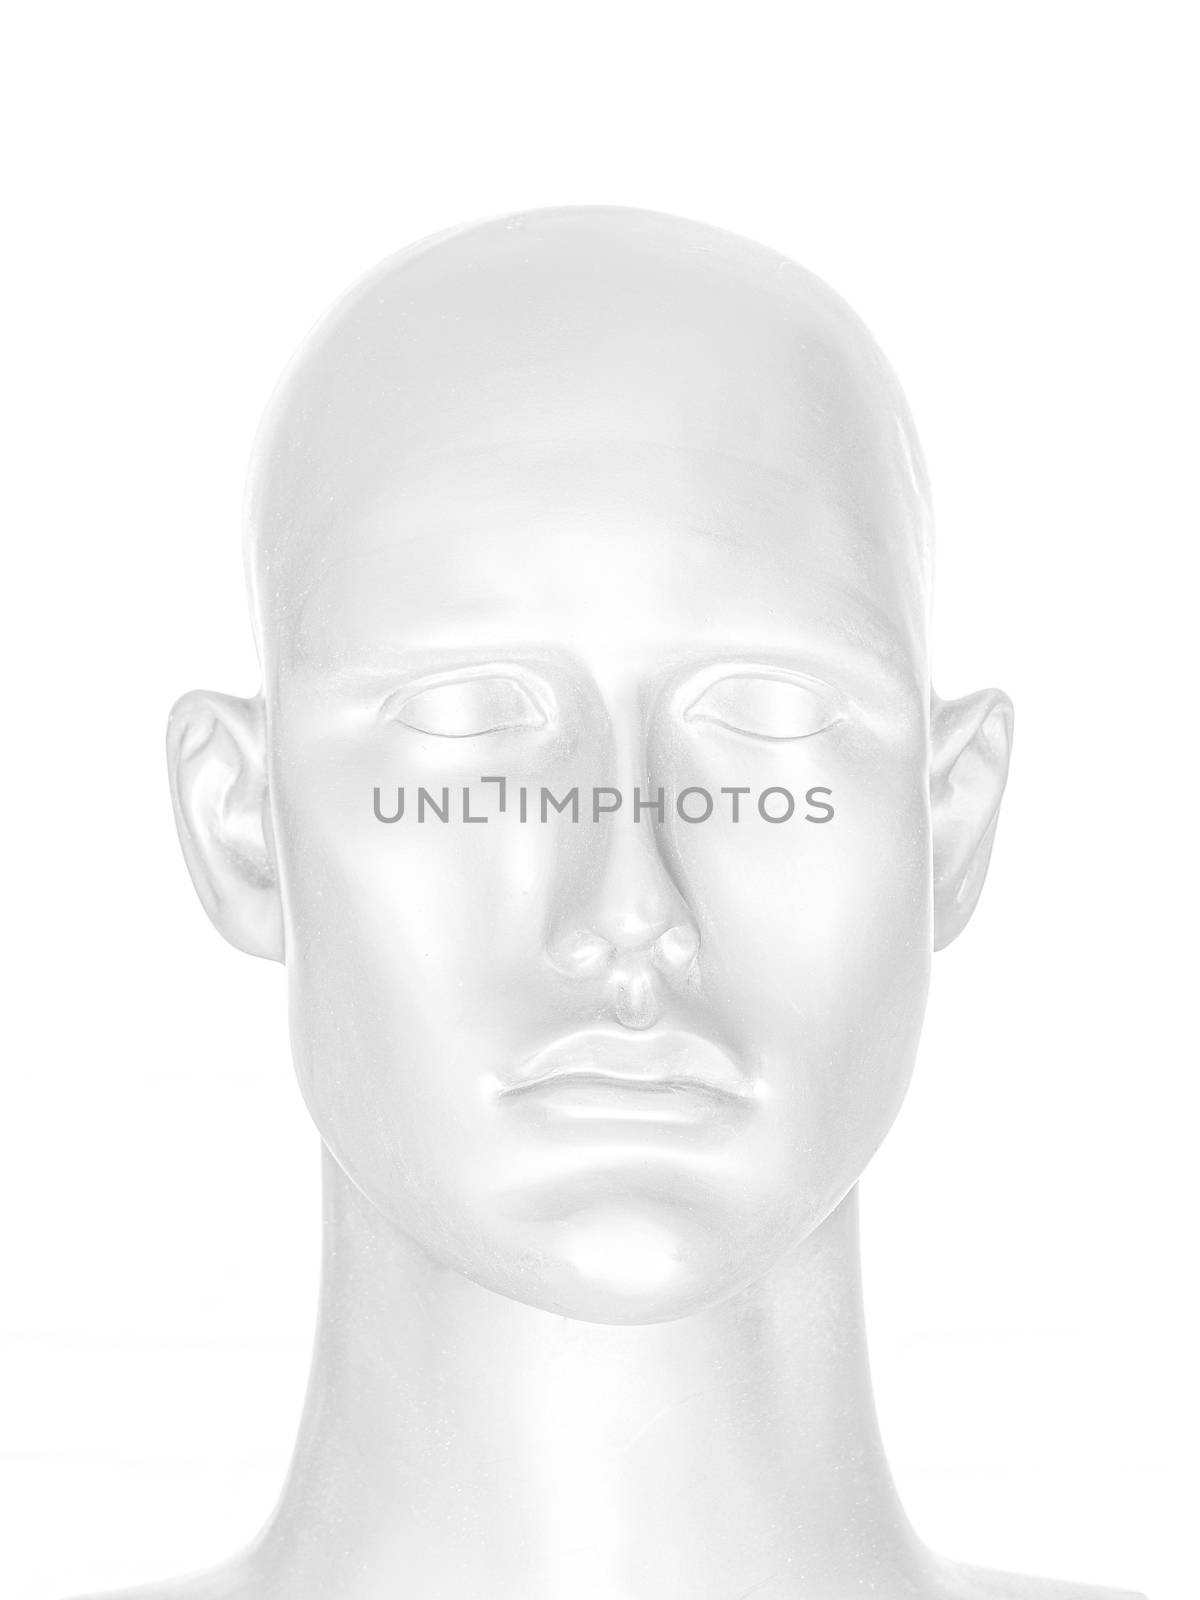 Abstract image of human face, portrait of mannequin head in high-key style